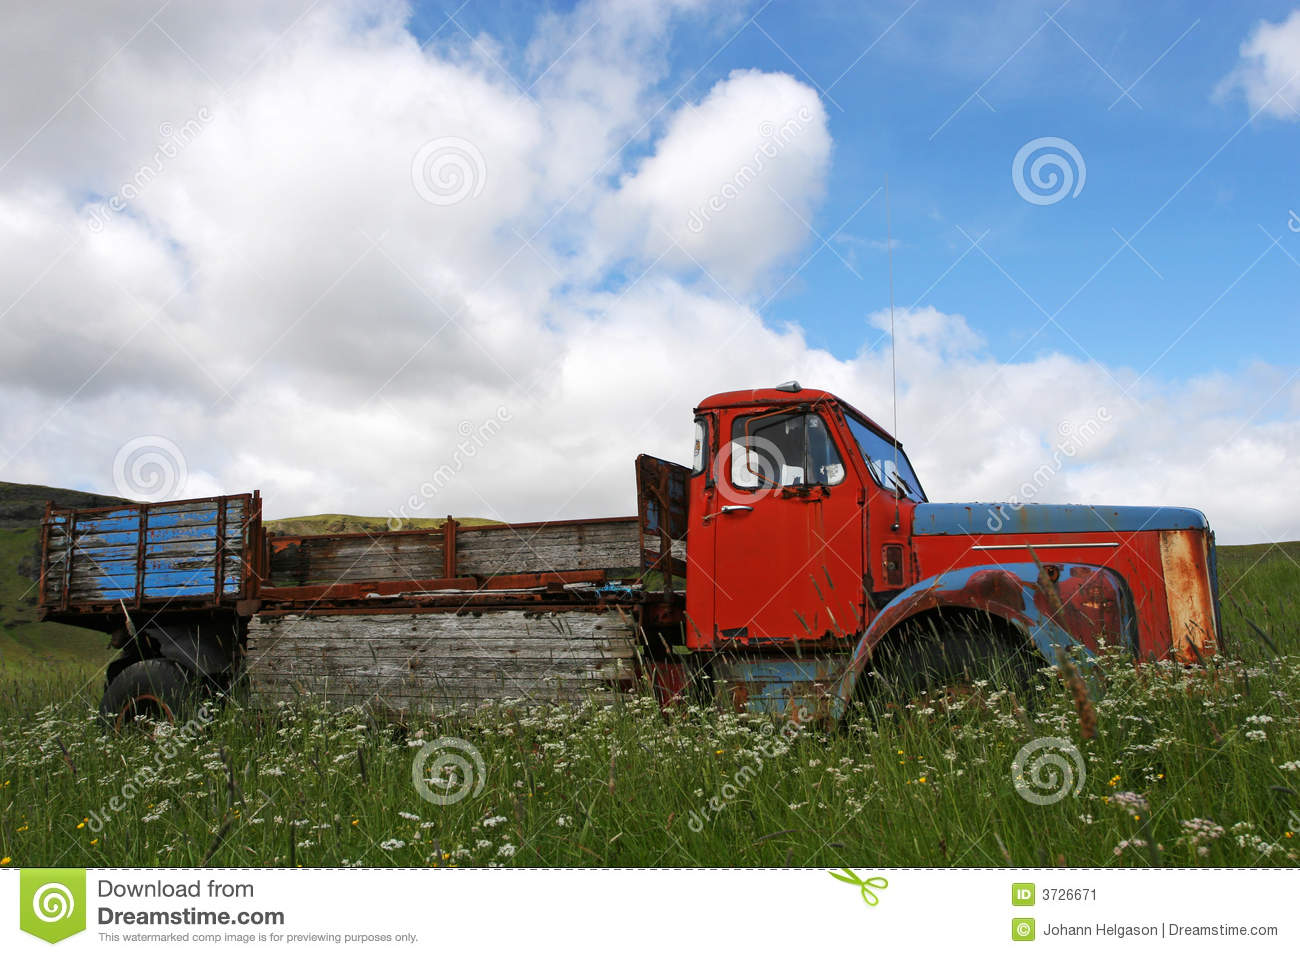 Old Truck Stock Image   Image  3726671